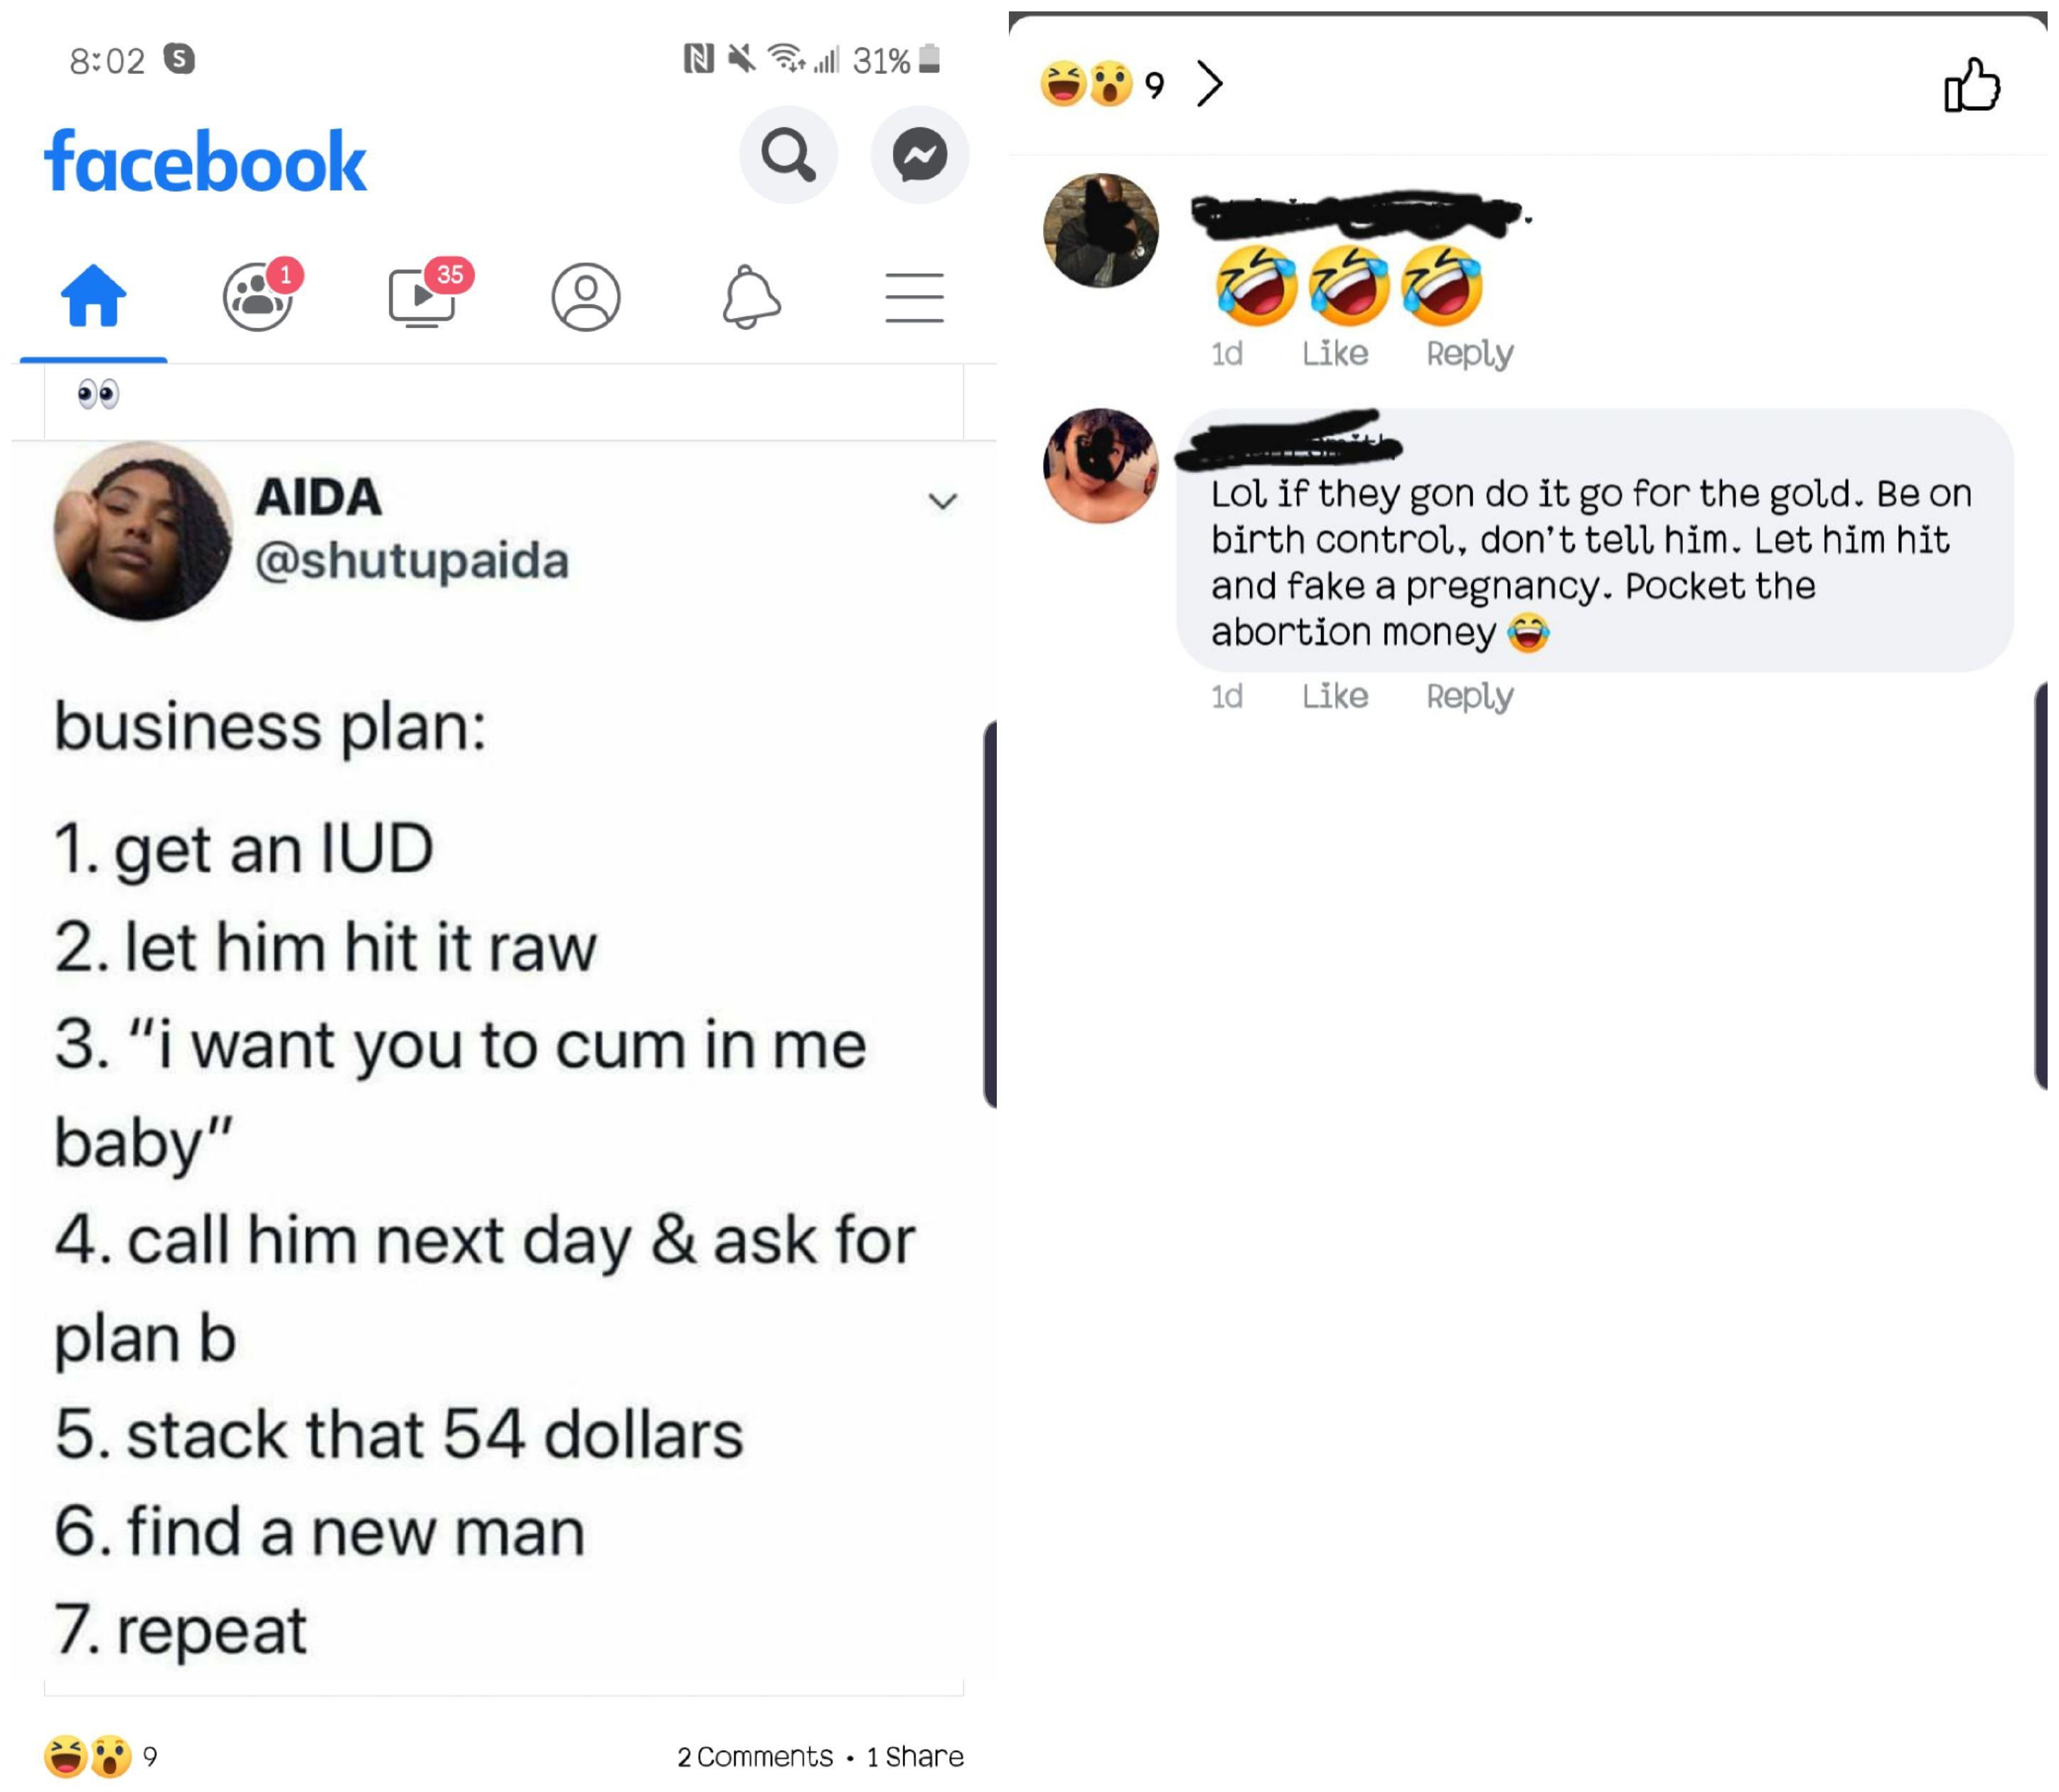 facebook - NS31% facebook 10 Aida Lol if they gon do it go for the gold. Be on birth control, don't tell him. Let him hit and fake a pregnancy. Pocket the abortion money ad business plan 1. get an Iud 2. let him hit it raw 3. "I want you to cum in me baby